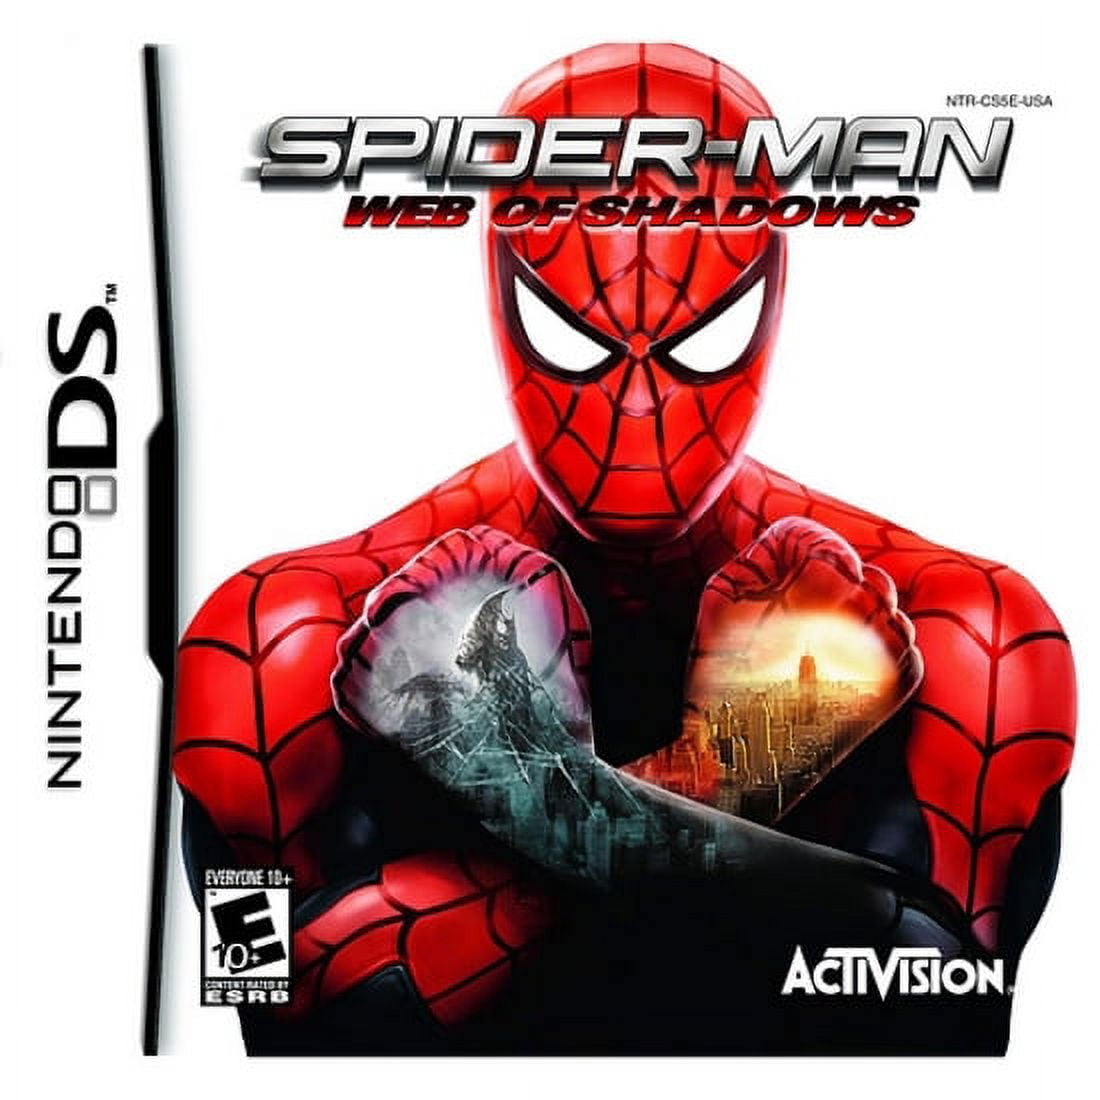 Spider-Man - Web of Shadows - Sony Playstation 2 PS2 - Editorial use only  Stock Photo - Alamy